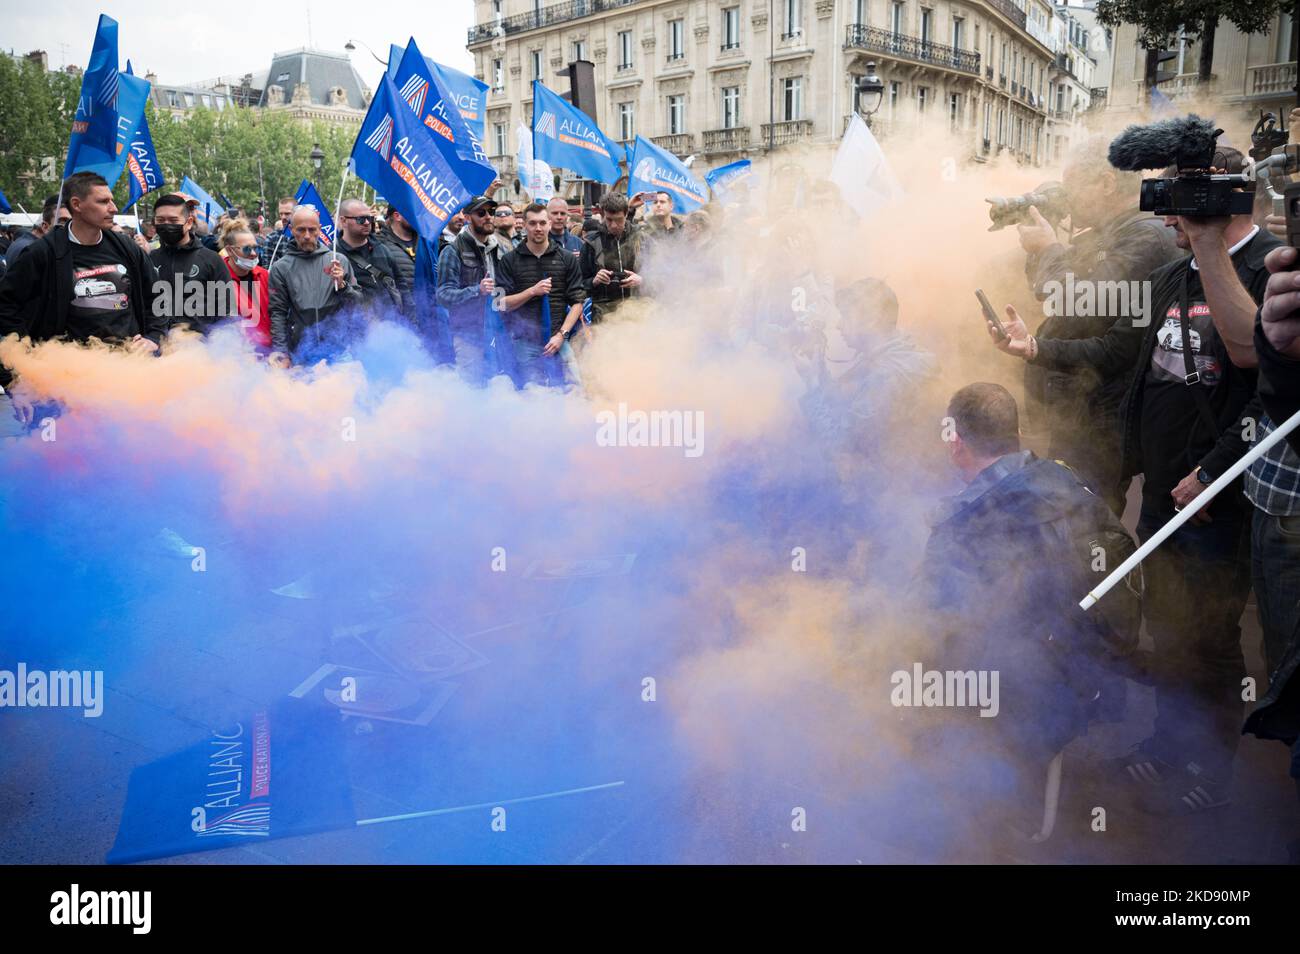 Police officers stand behind a cloud of blue and orange smoke during a police demonstration in Paris on May 2, 2022 to protest the indictment for 'voluntary manslaughter' of the French police officer who killed two men who allegedly forced a checkpoint on the Pont-Neuf in Paris on April 24, 2022. The call for the rally was initiated by the Alliance Police Nationale union, which was joined by the Synergie officers' union and Unsa-Police. (Photo by Samuel Boivin/NurPhoto) Stock Photo